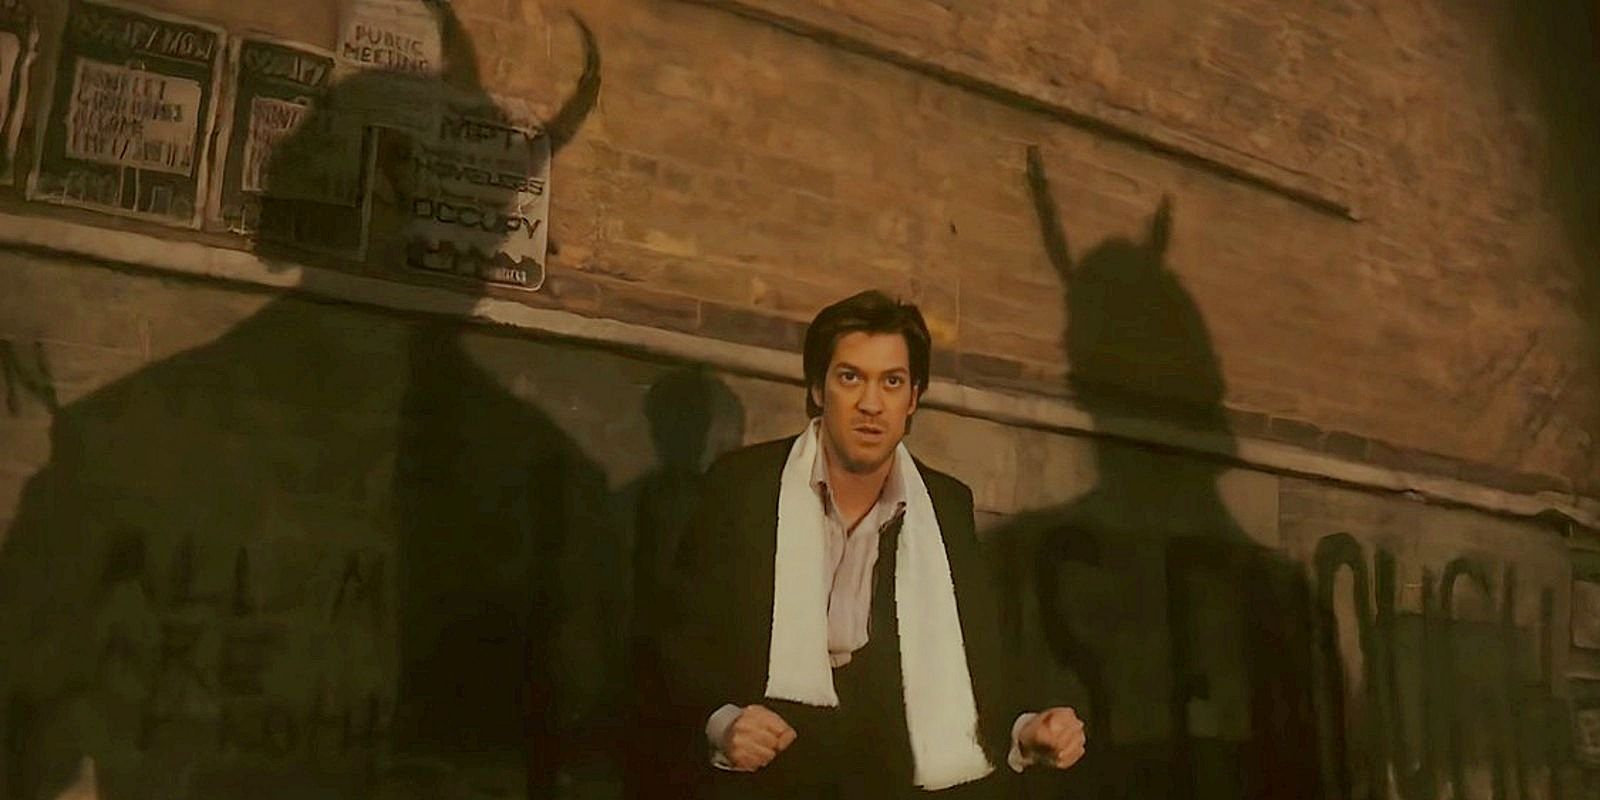 Brad Wolfe in a tuxedo against a brick wall with two horned shadows of Loki behind him